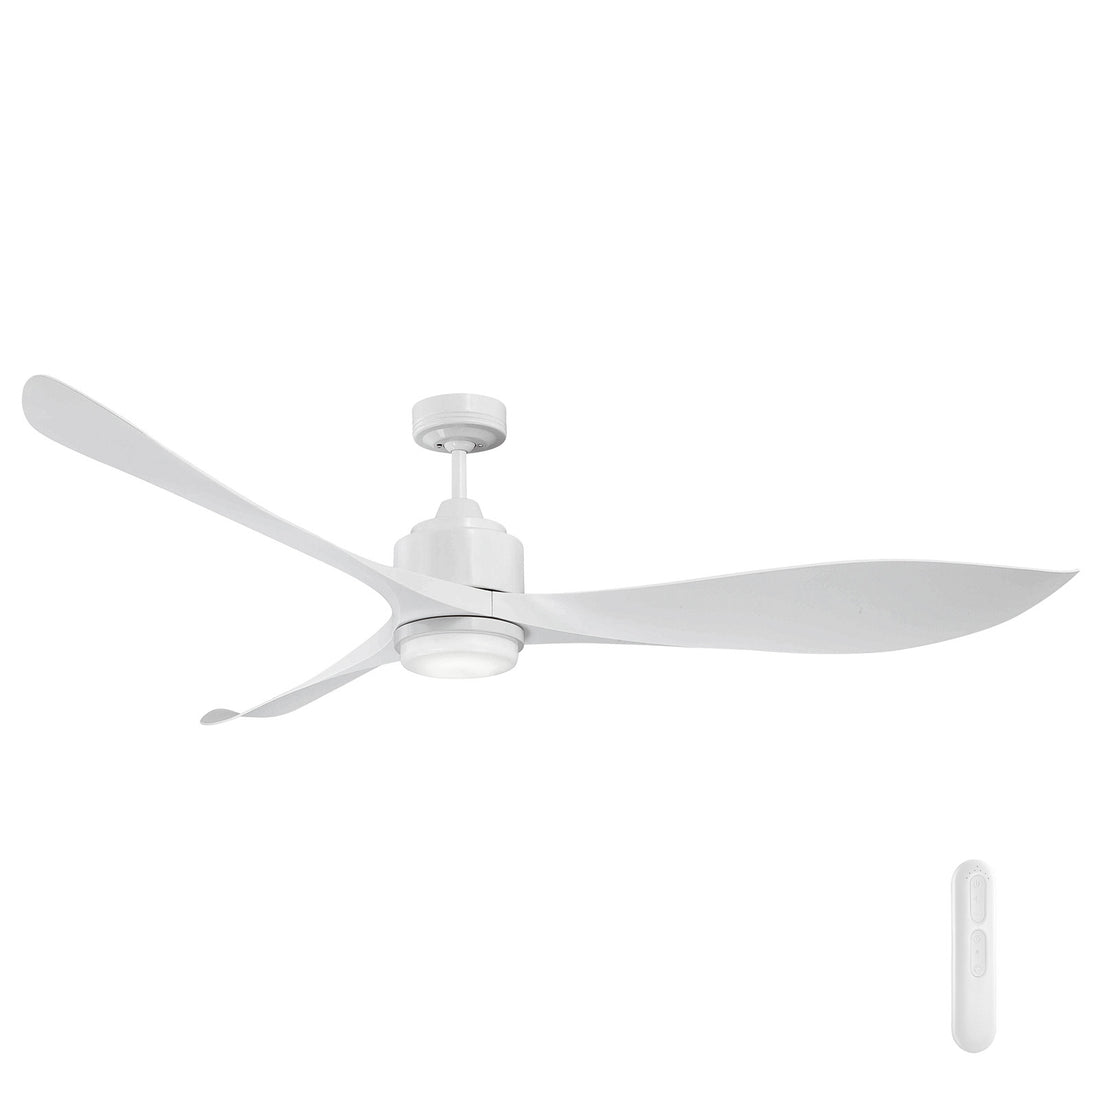 Eagle XL 168cm DC Ceiling Fan with LED Light and Remote